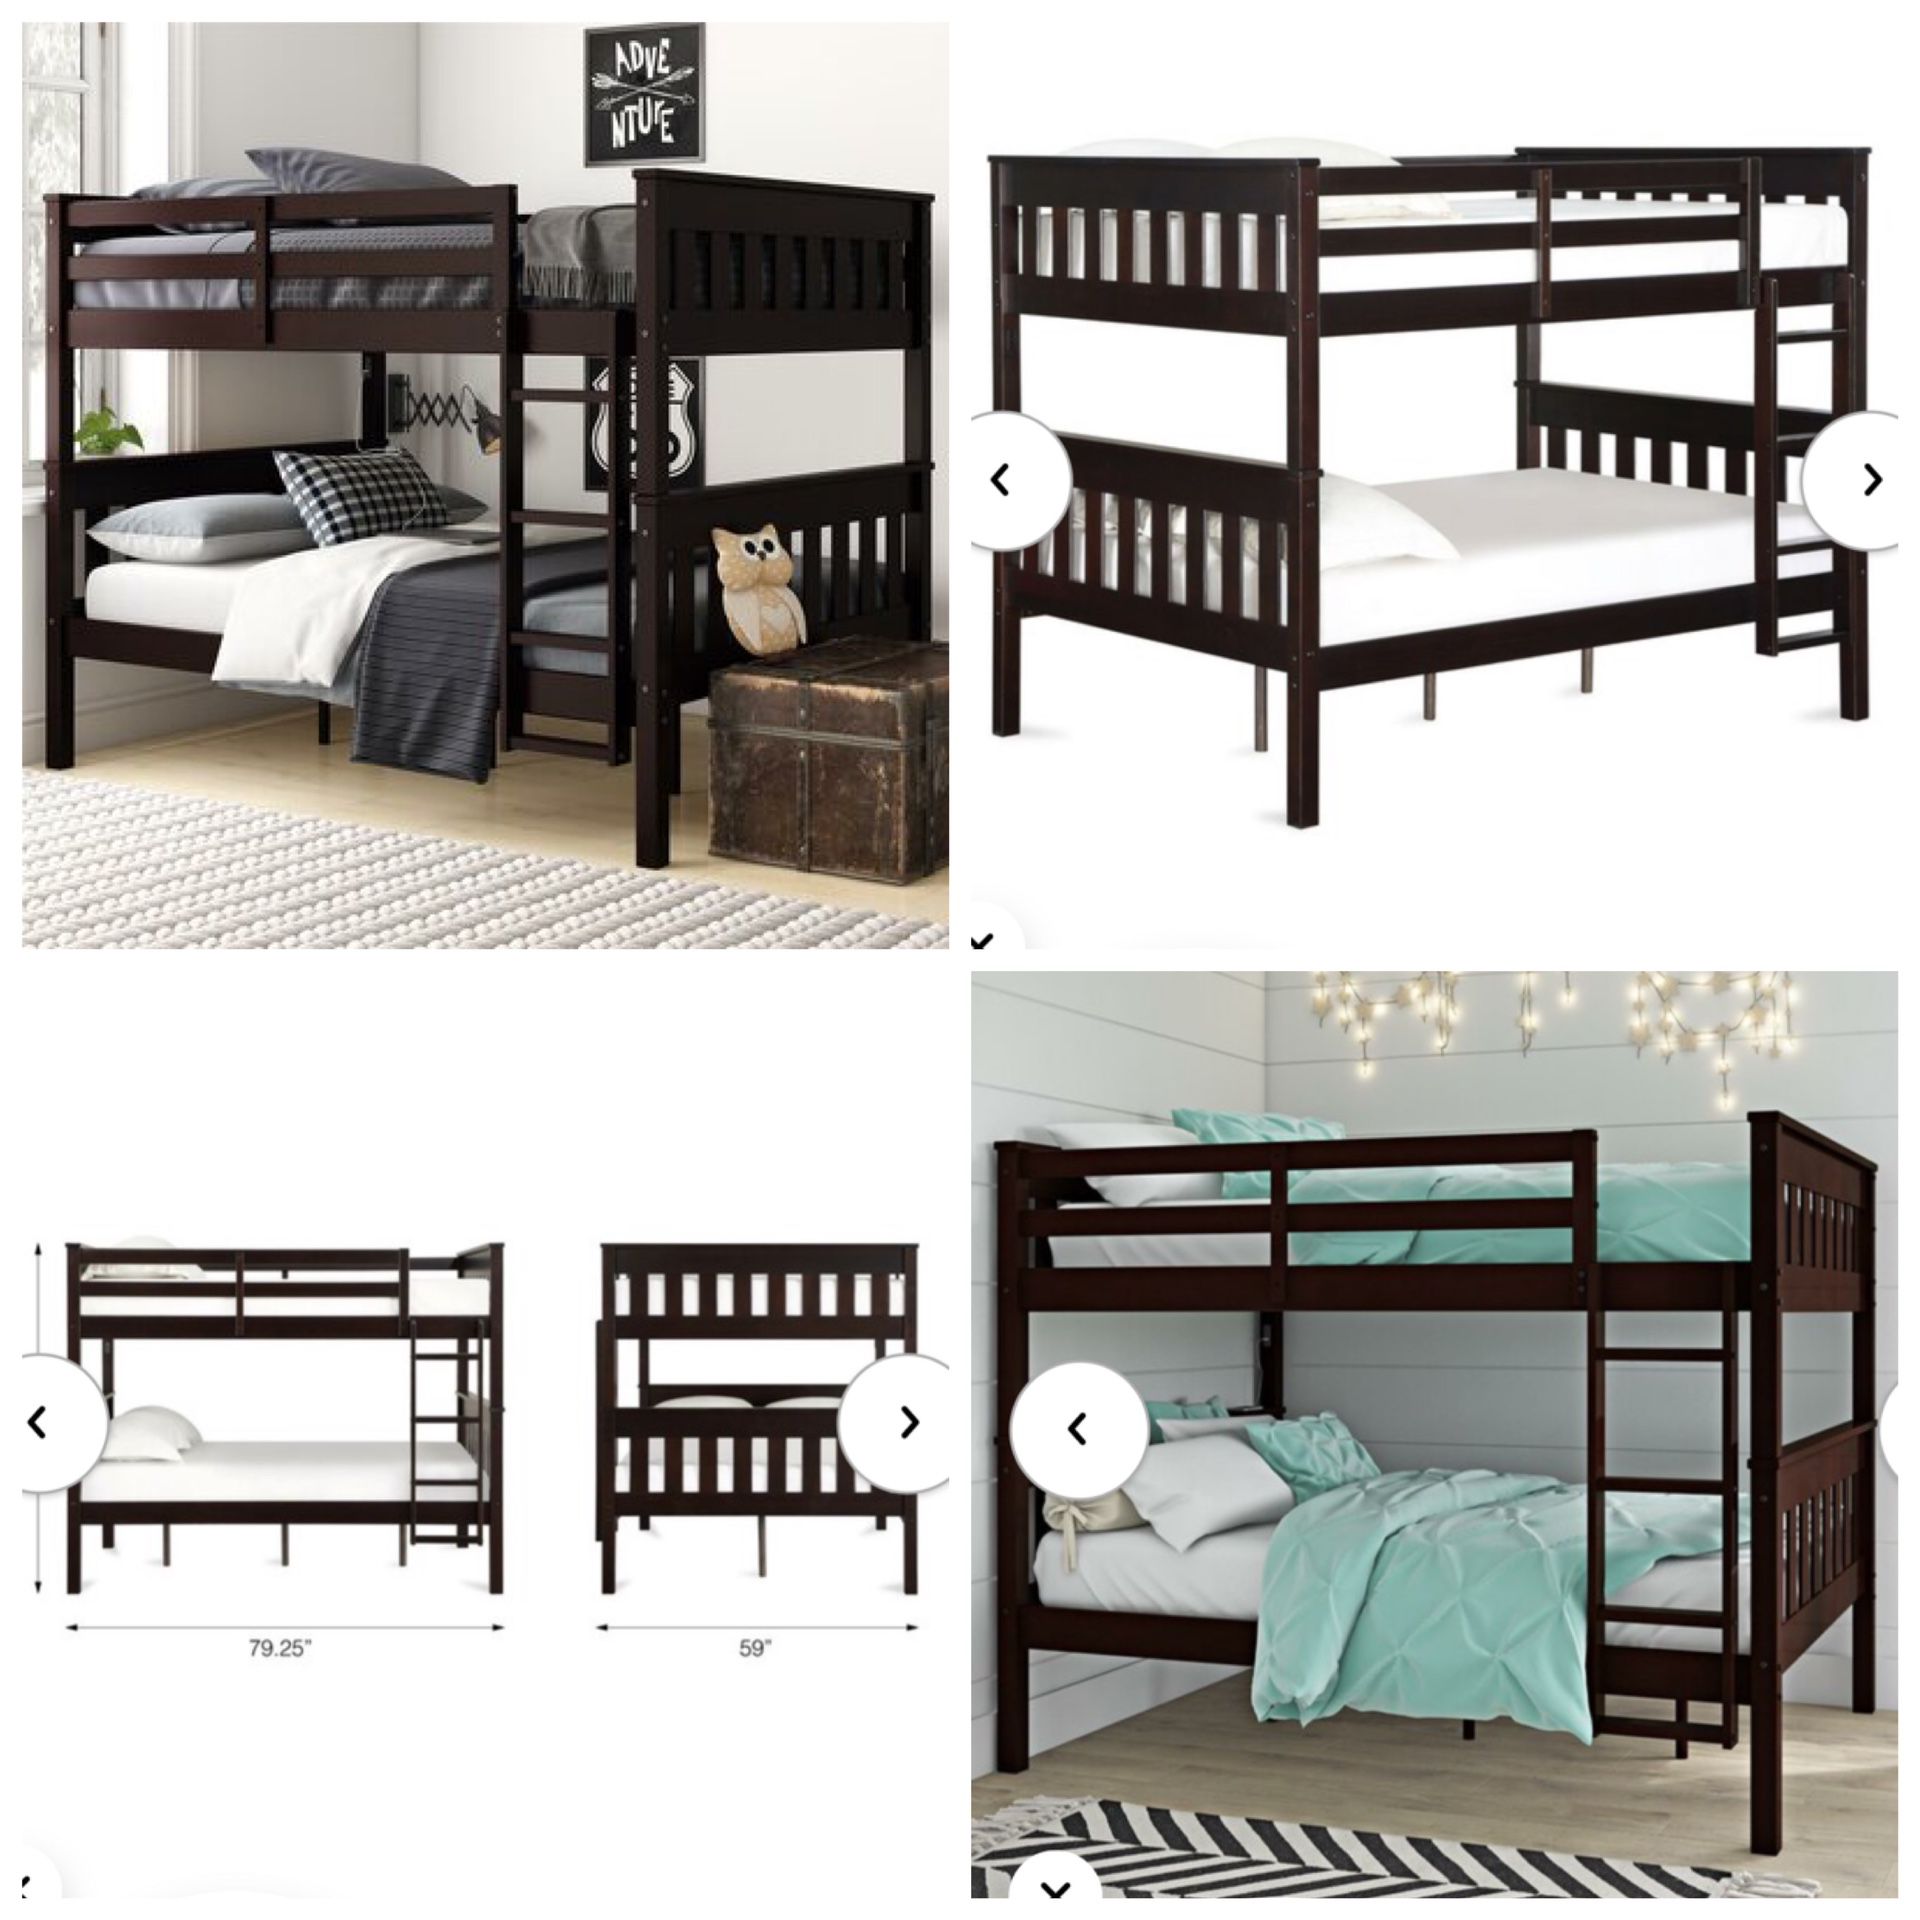 Black bunk bed frame only mattress not included